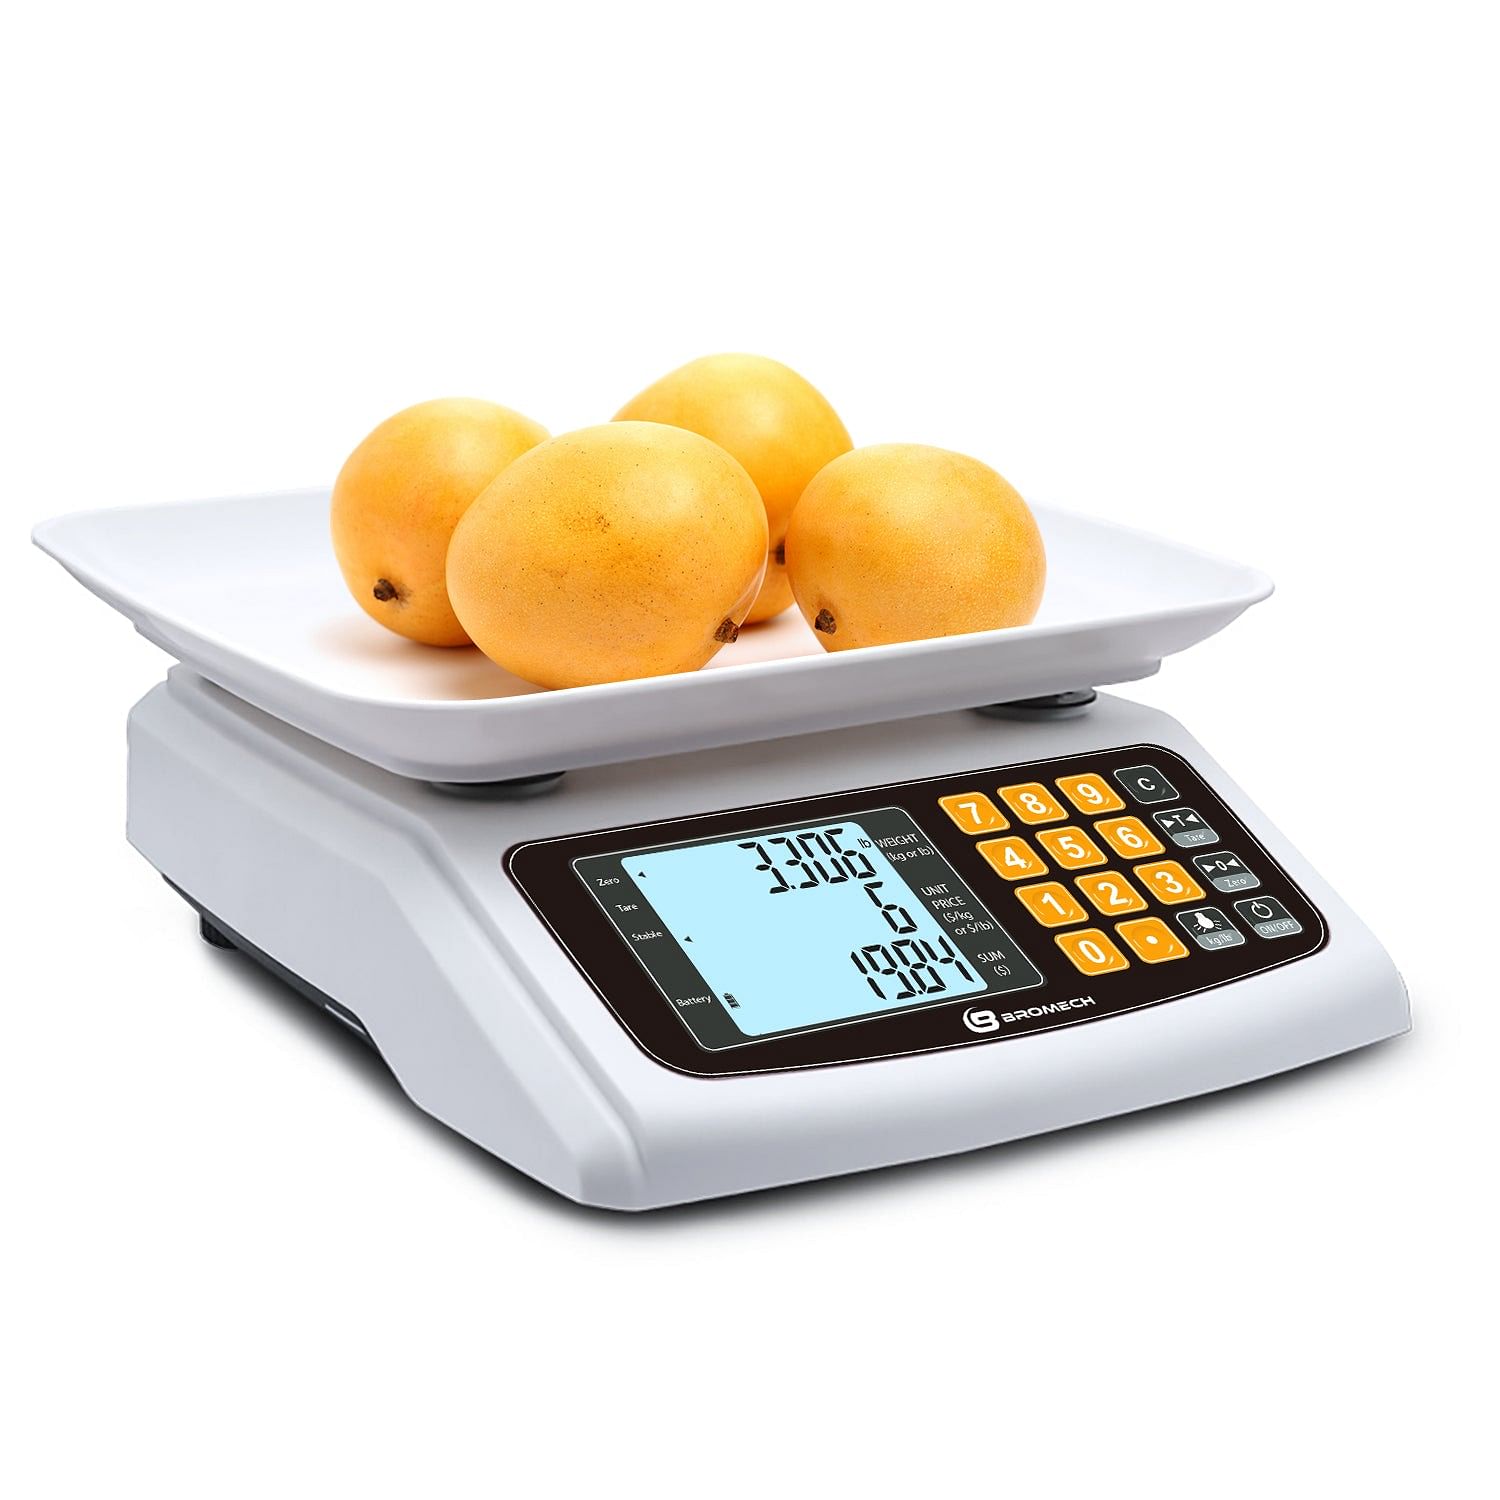 66 lbs Digital Weight Food Count Scale for Commercial 